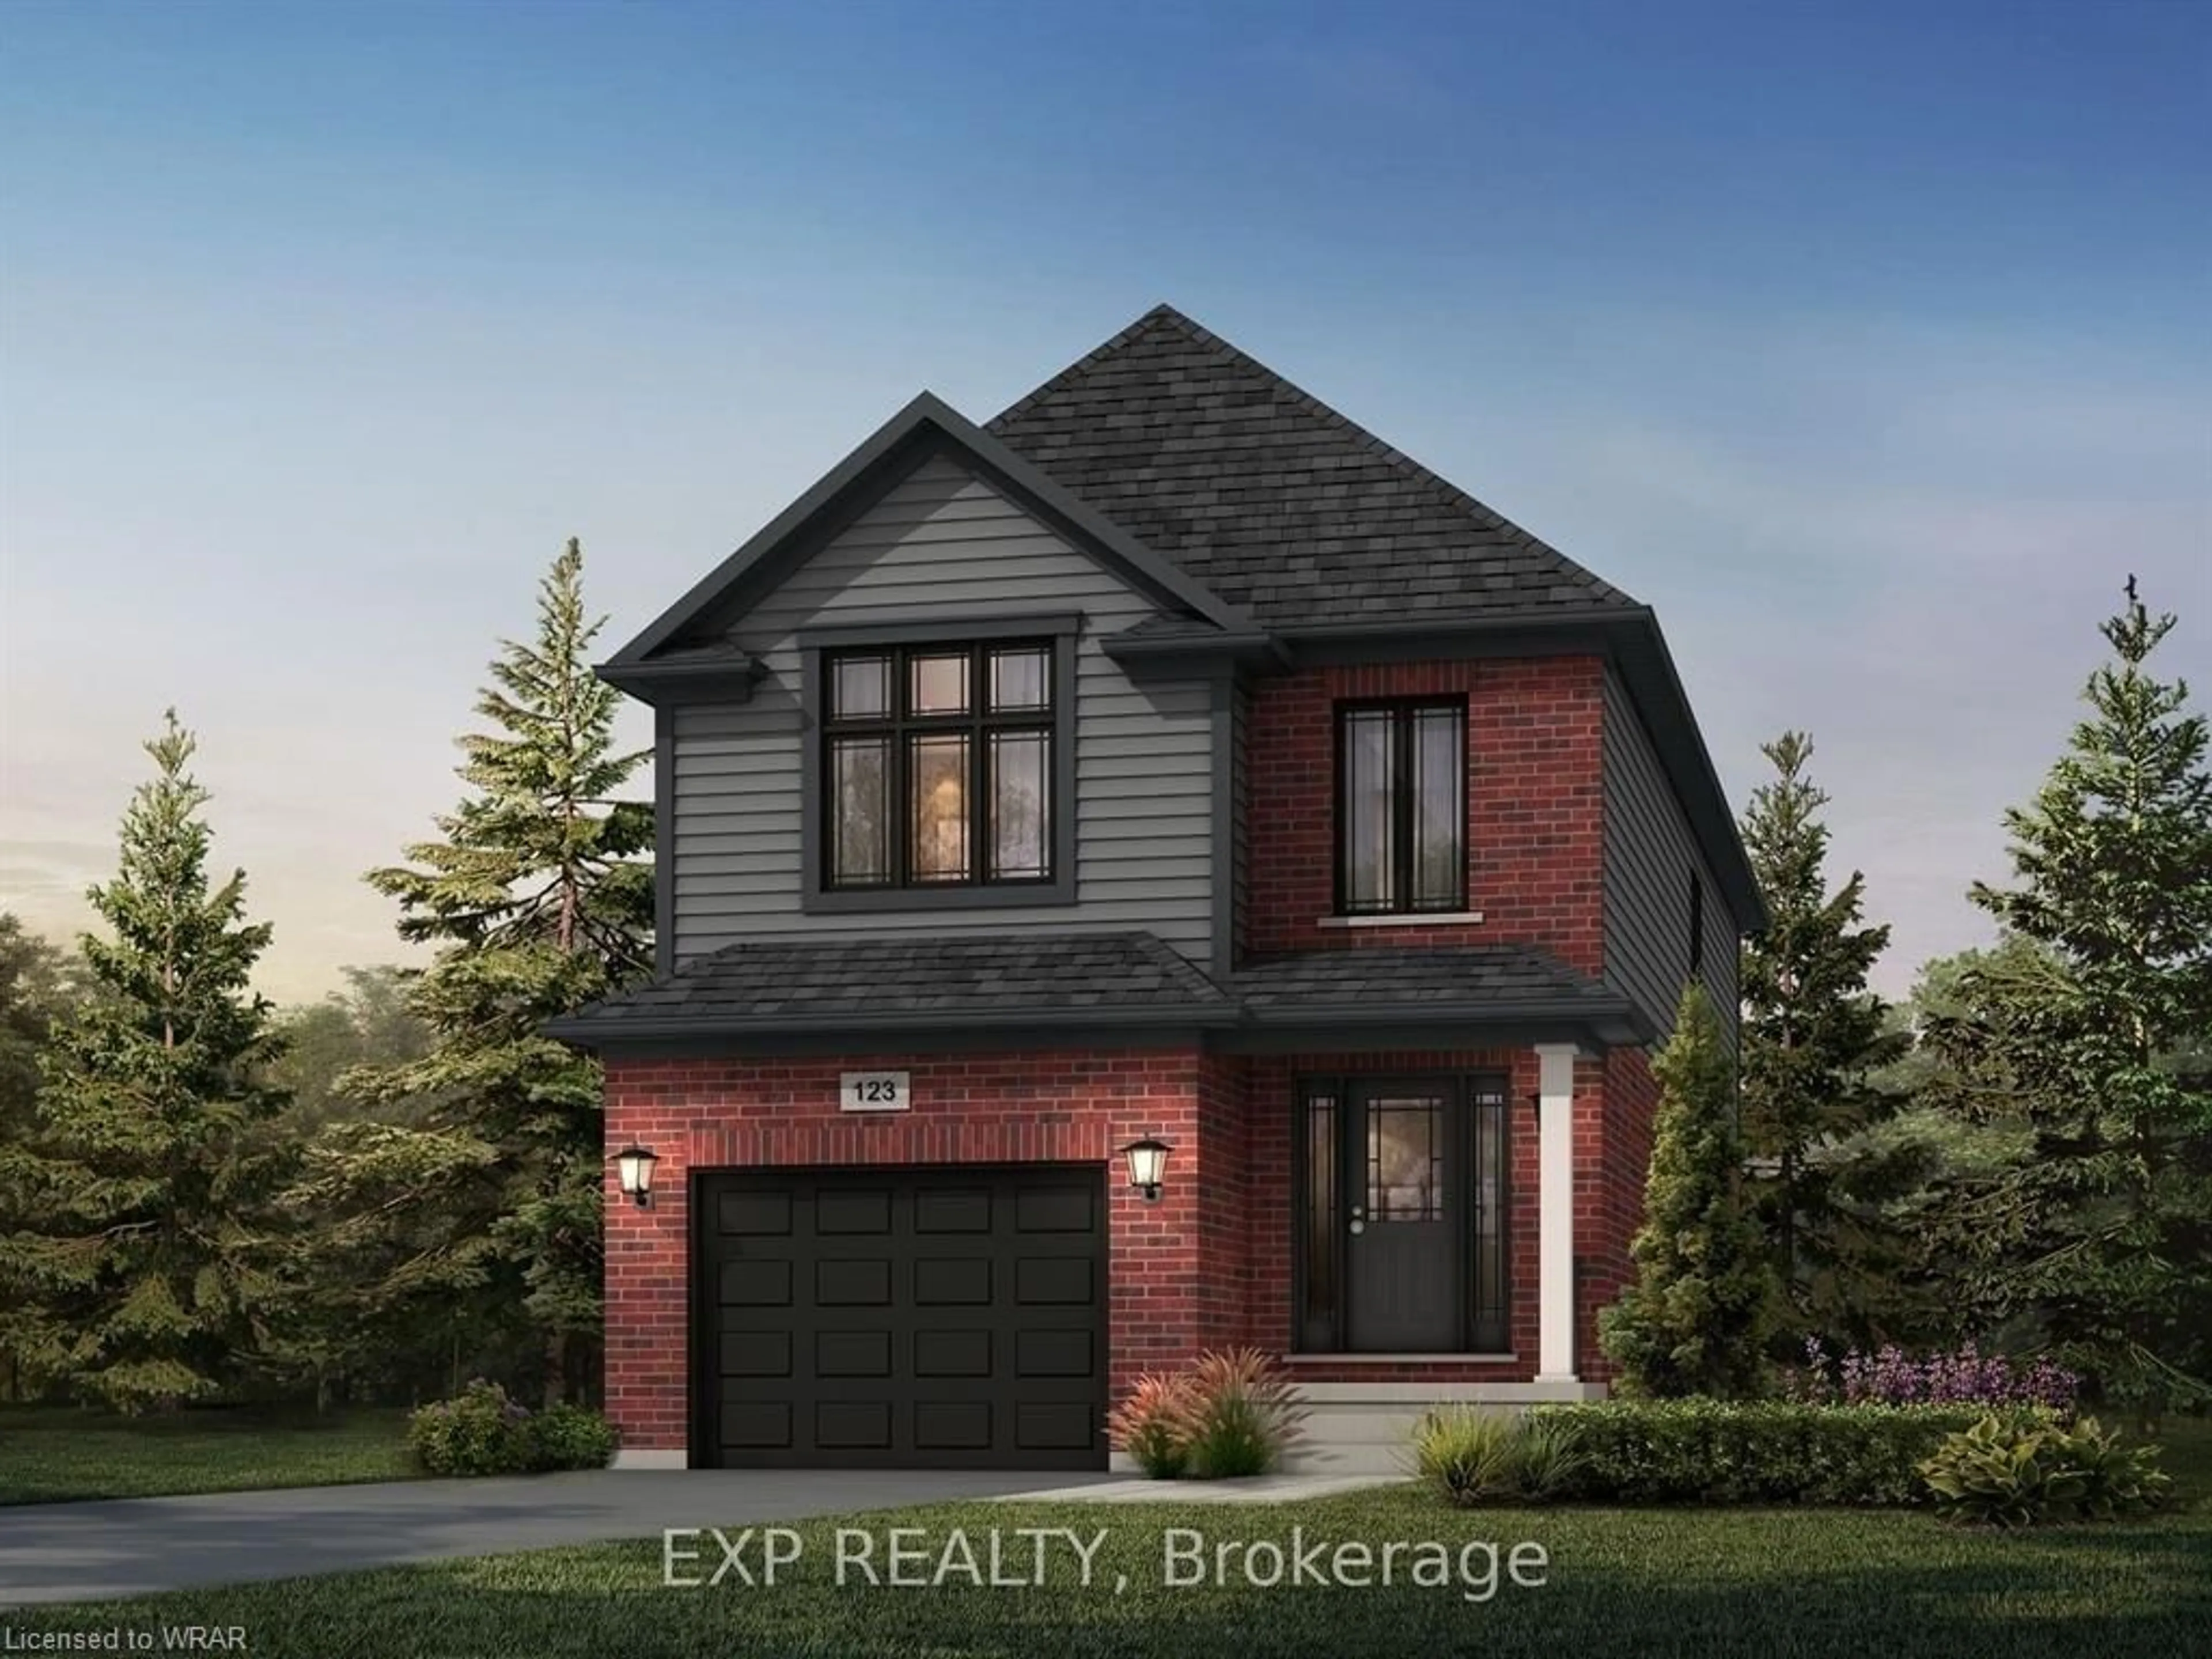 Home with brick exterior material for 300 Grange Rd, Guelph Ontario N1E 6N8